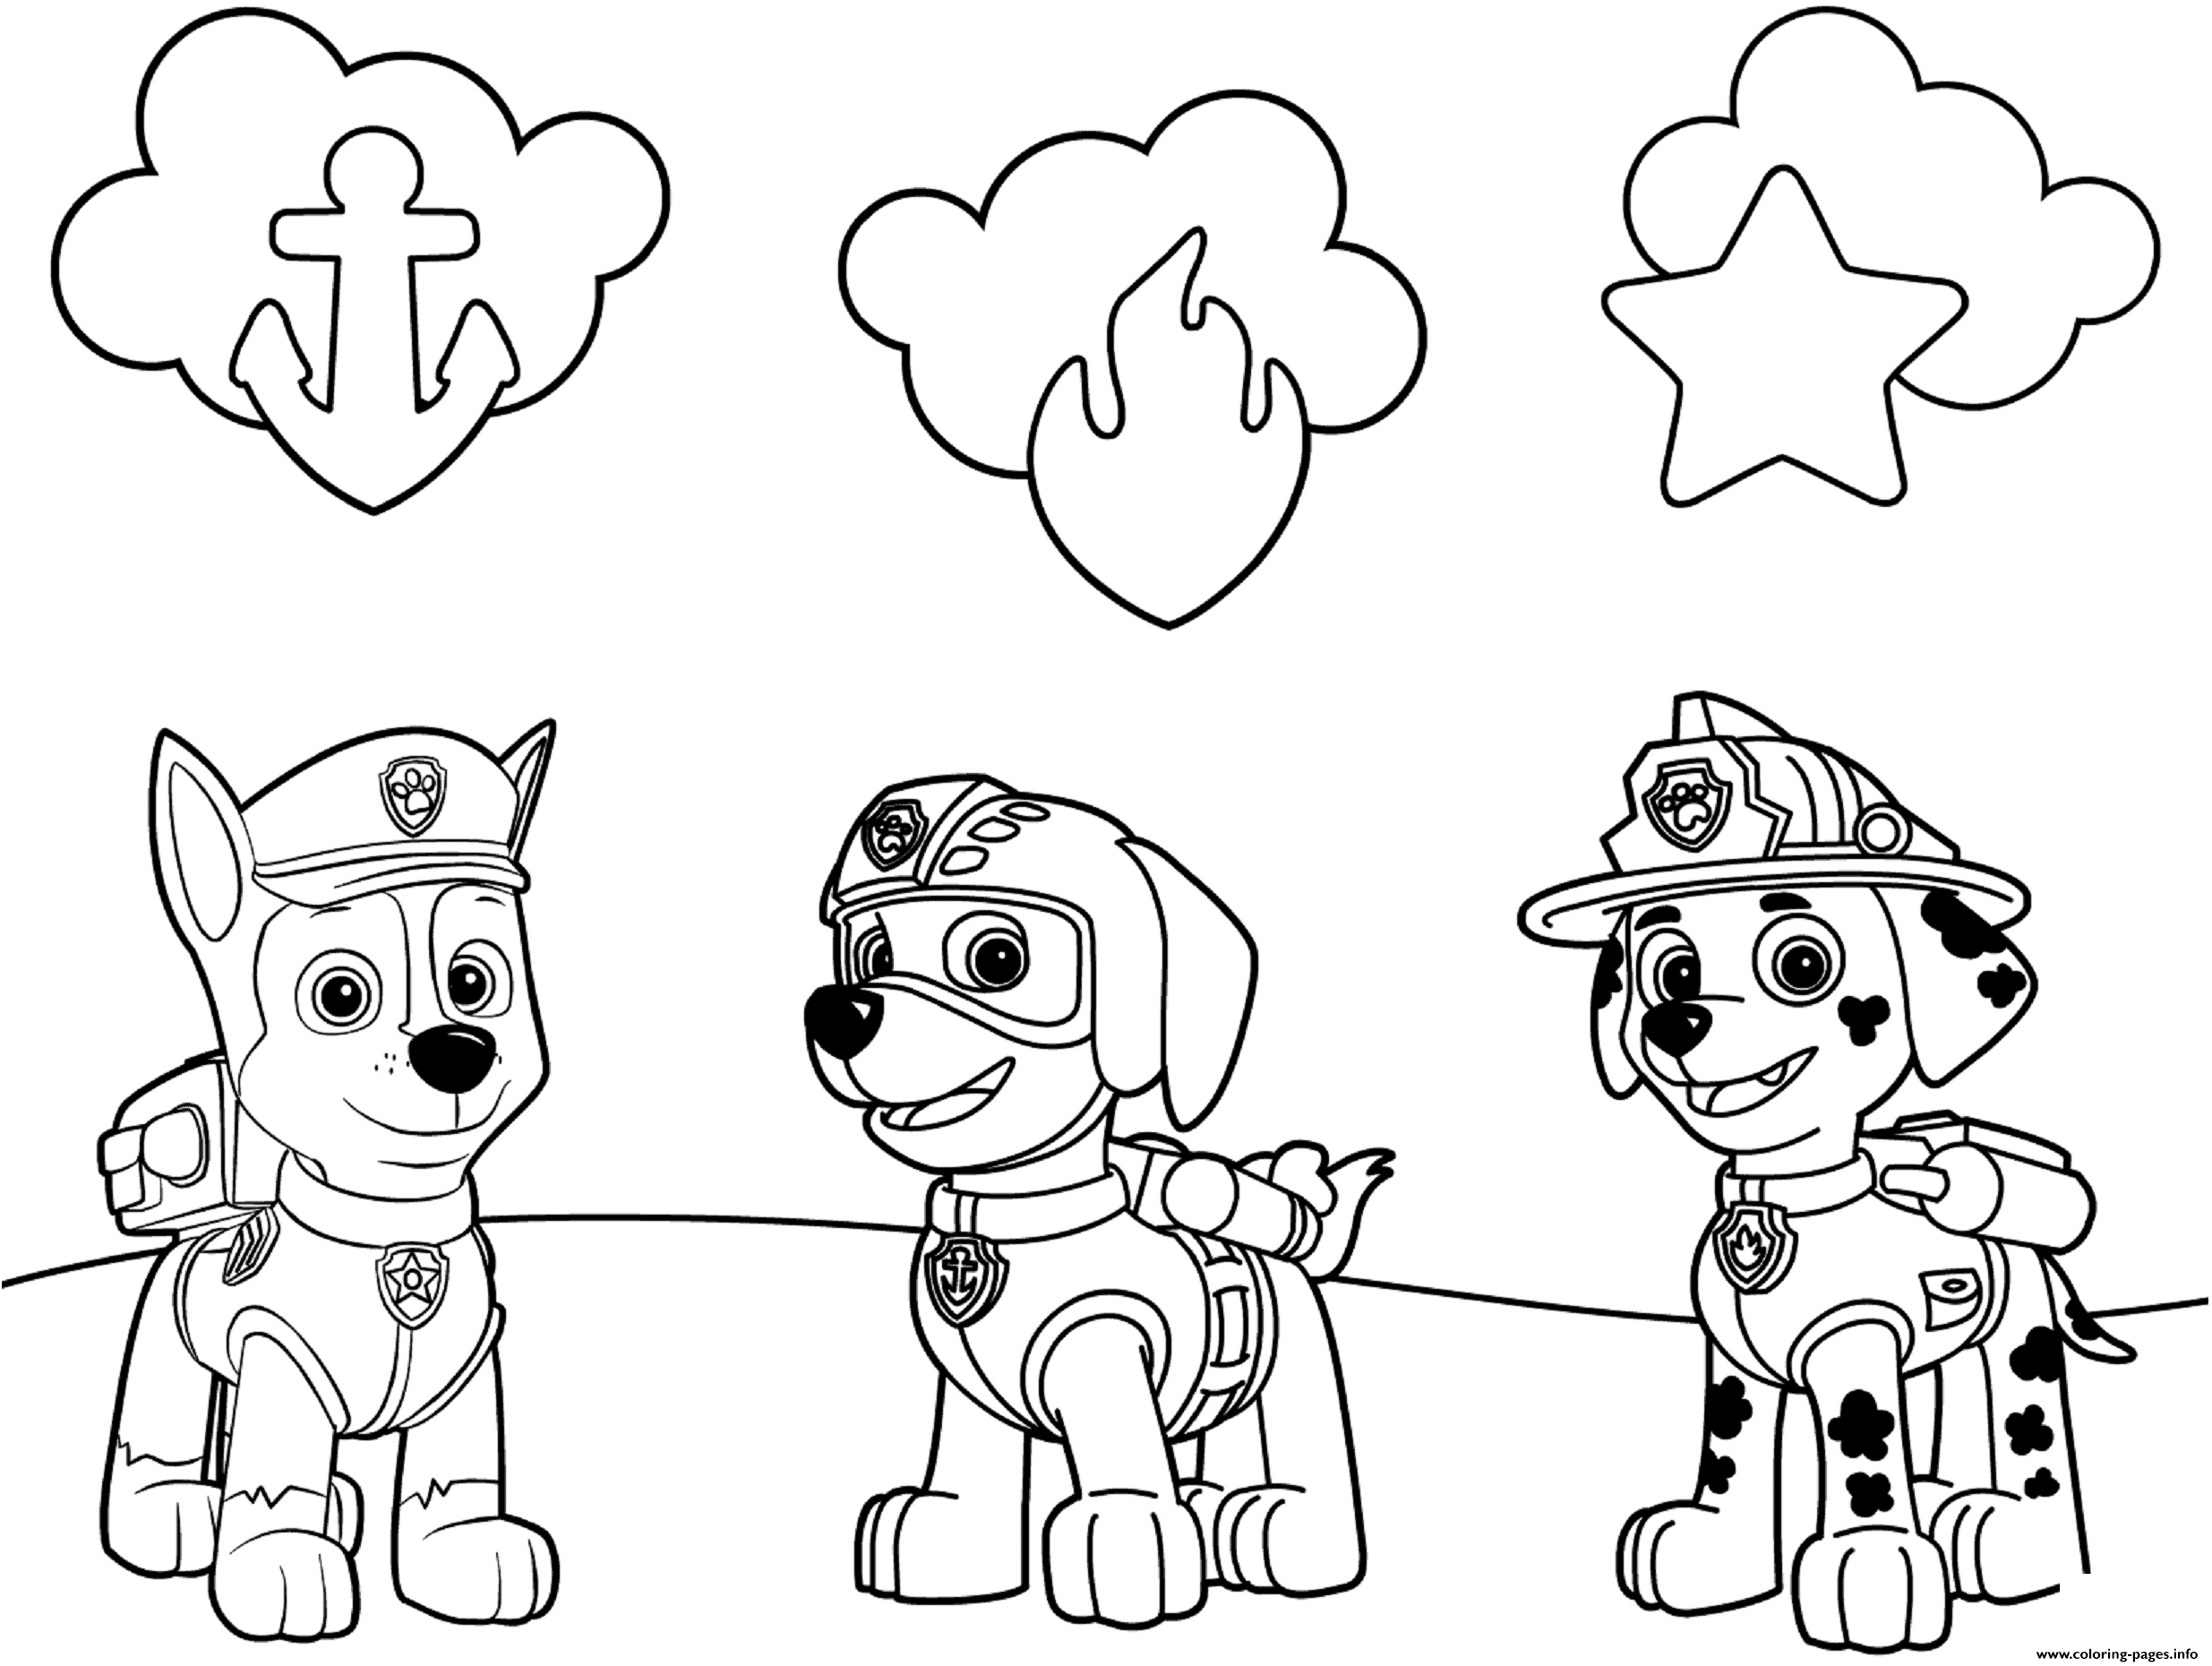 FREE PAW Patrol Coloring Pages Happiness is Homemade